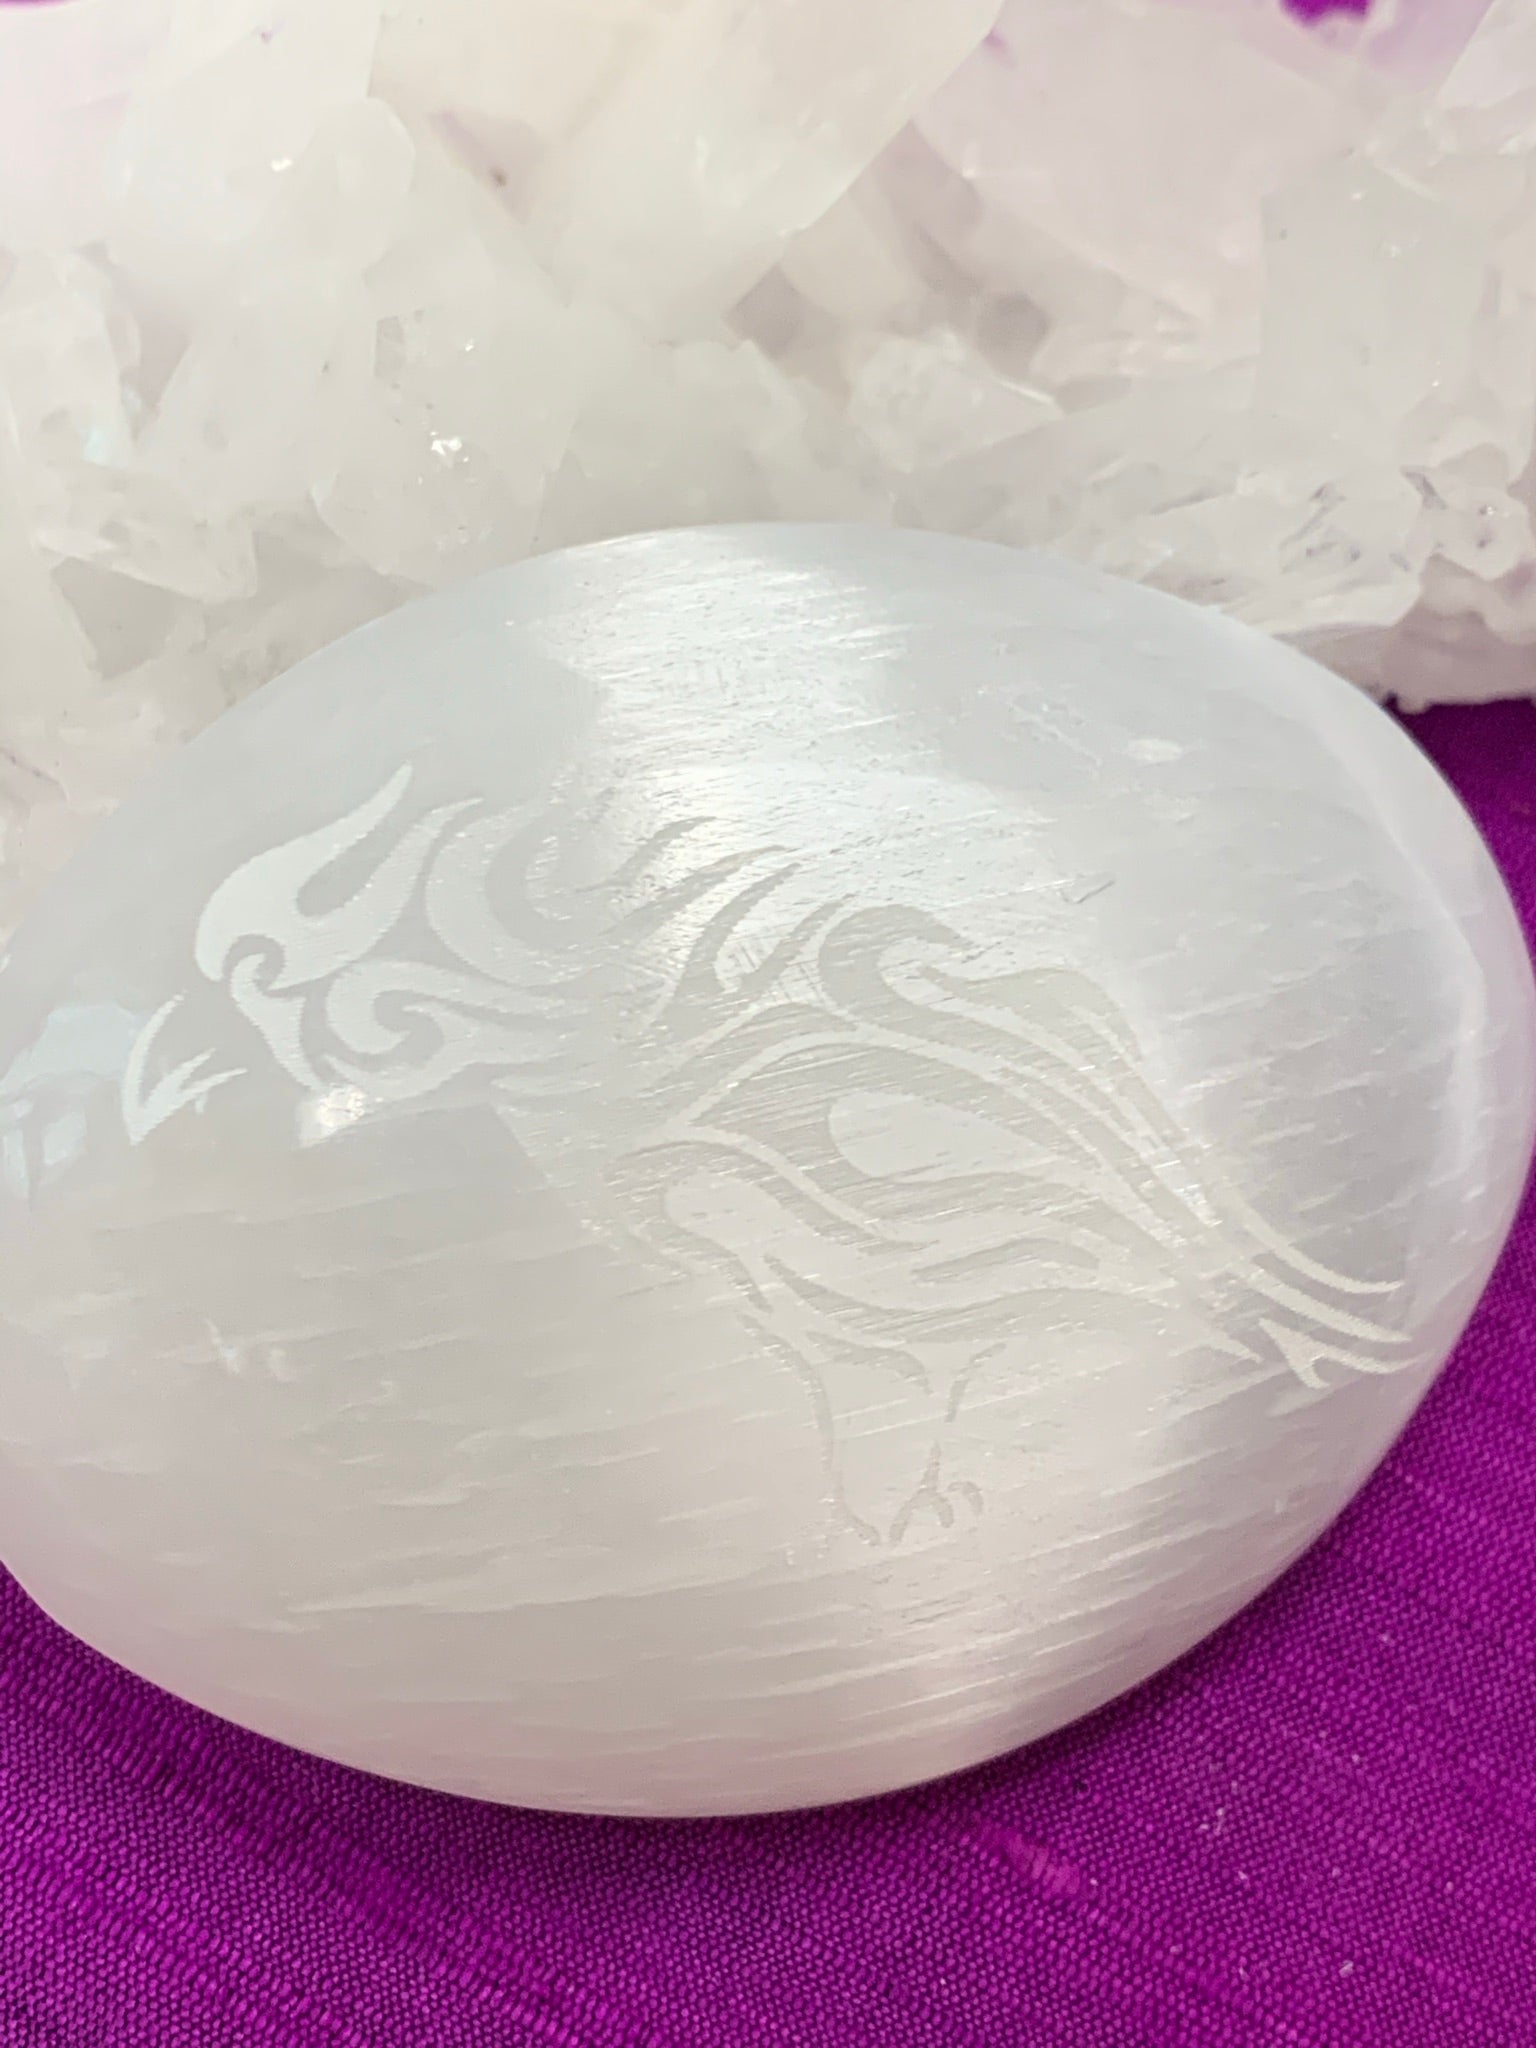 Close-up view of etched raven in smooth, polished selenite palm stone. Selenite ranges from translucent to milky white and is the perfect size to fit in your palm. Average weight is 4.2 oz and it is approximately 3"x2.5". This selenite is ethically sourced and workers receive living wages.